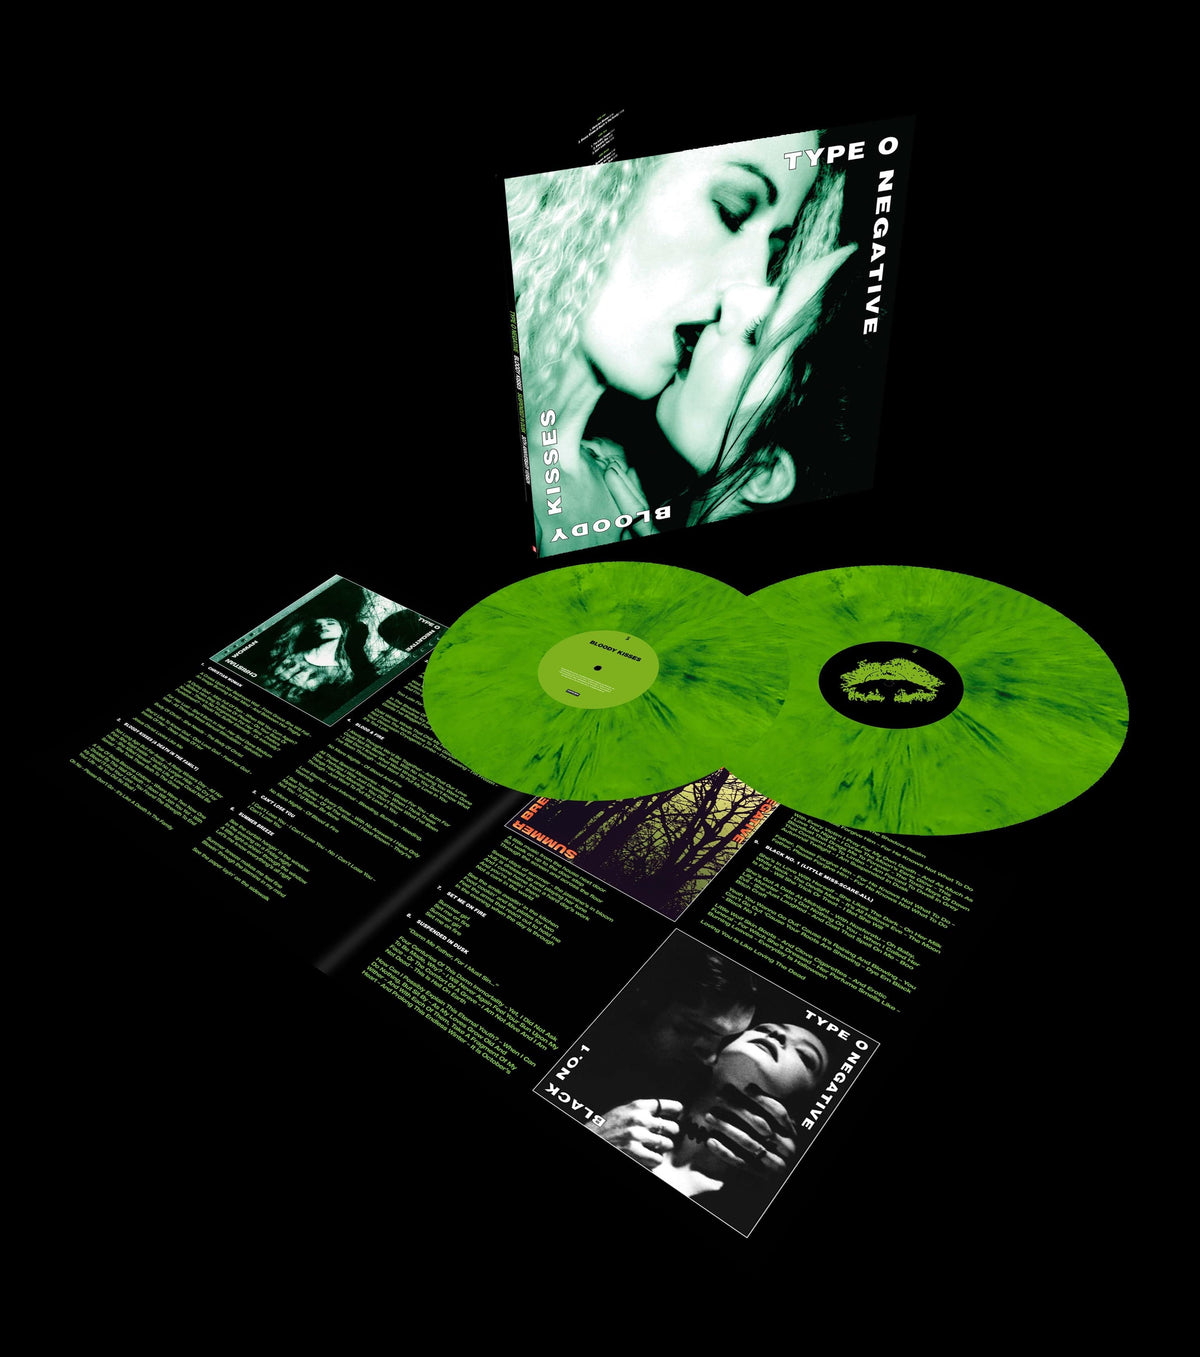 Bloody Kisses: Suspended in Dusk (Limited Edition) - Type O Negative [Colour Vinyl]